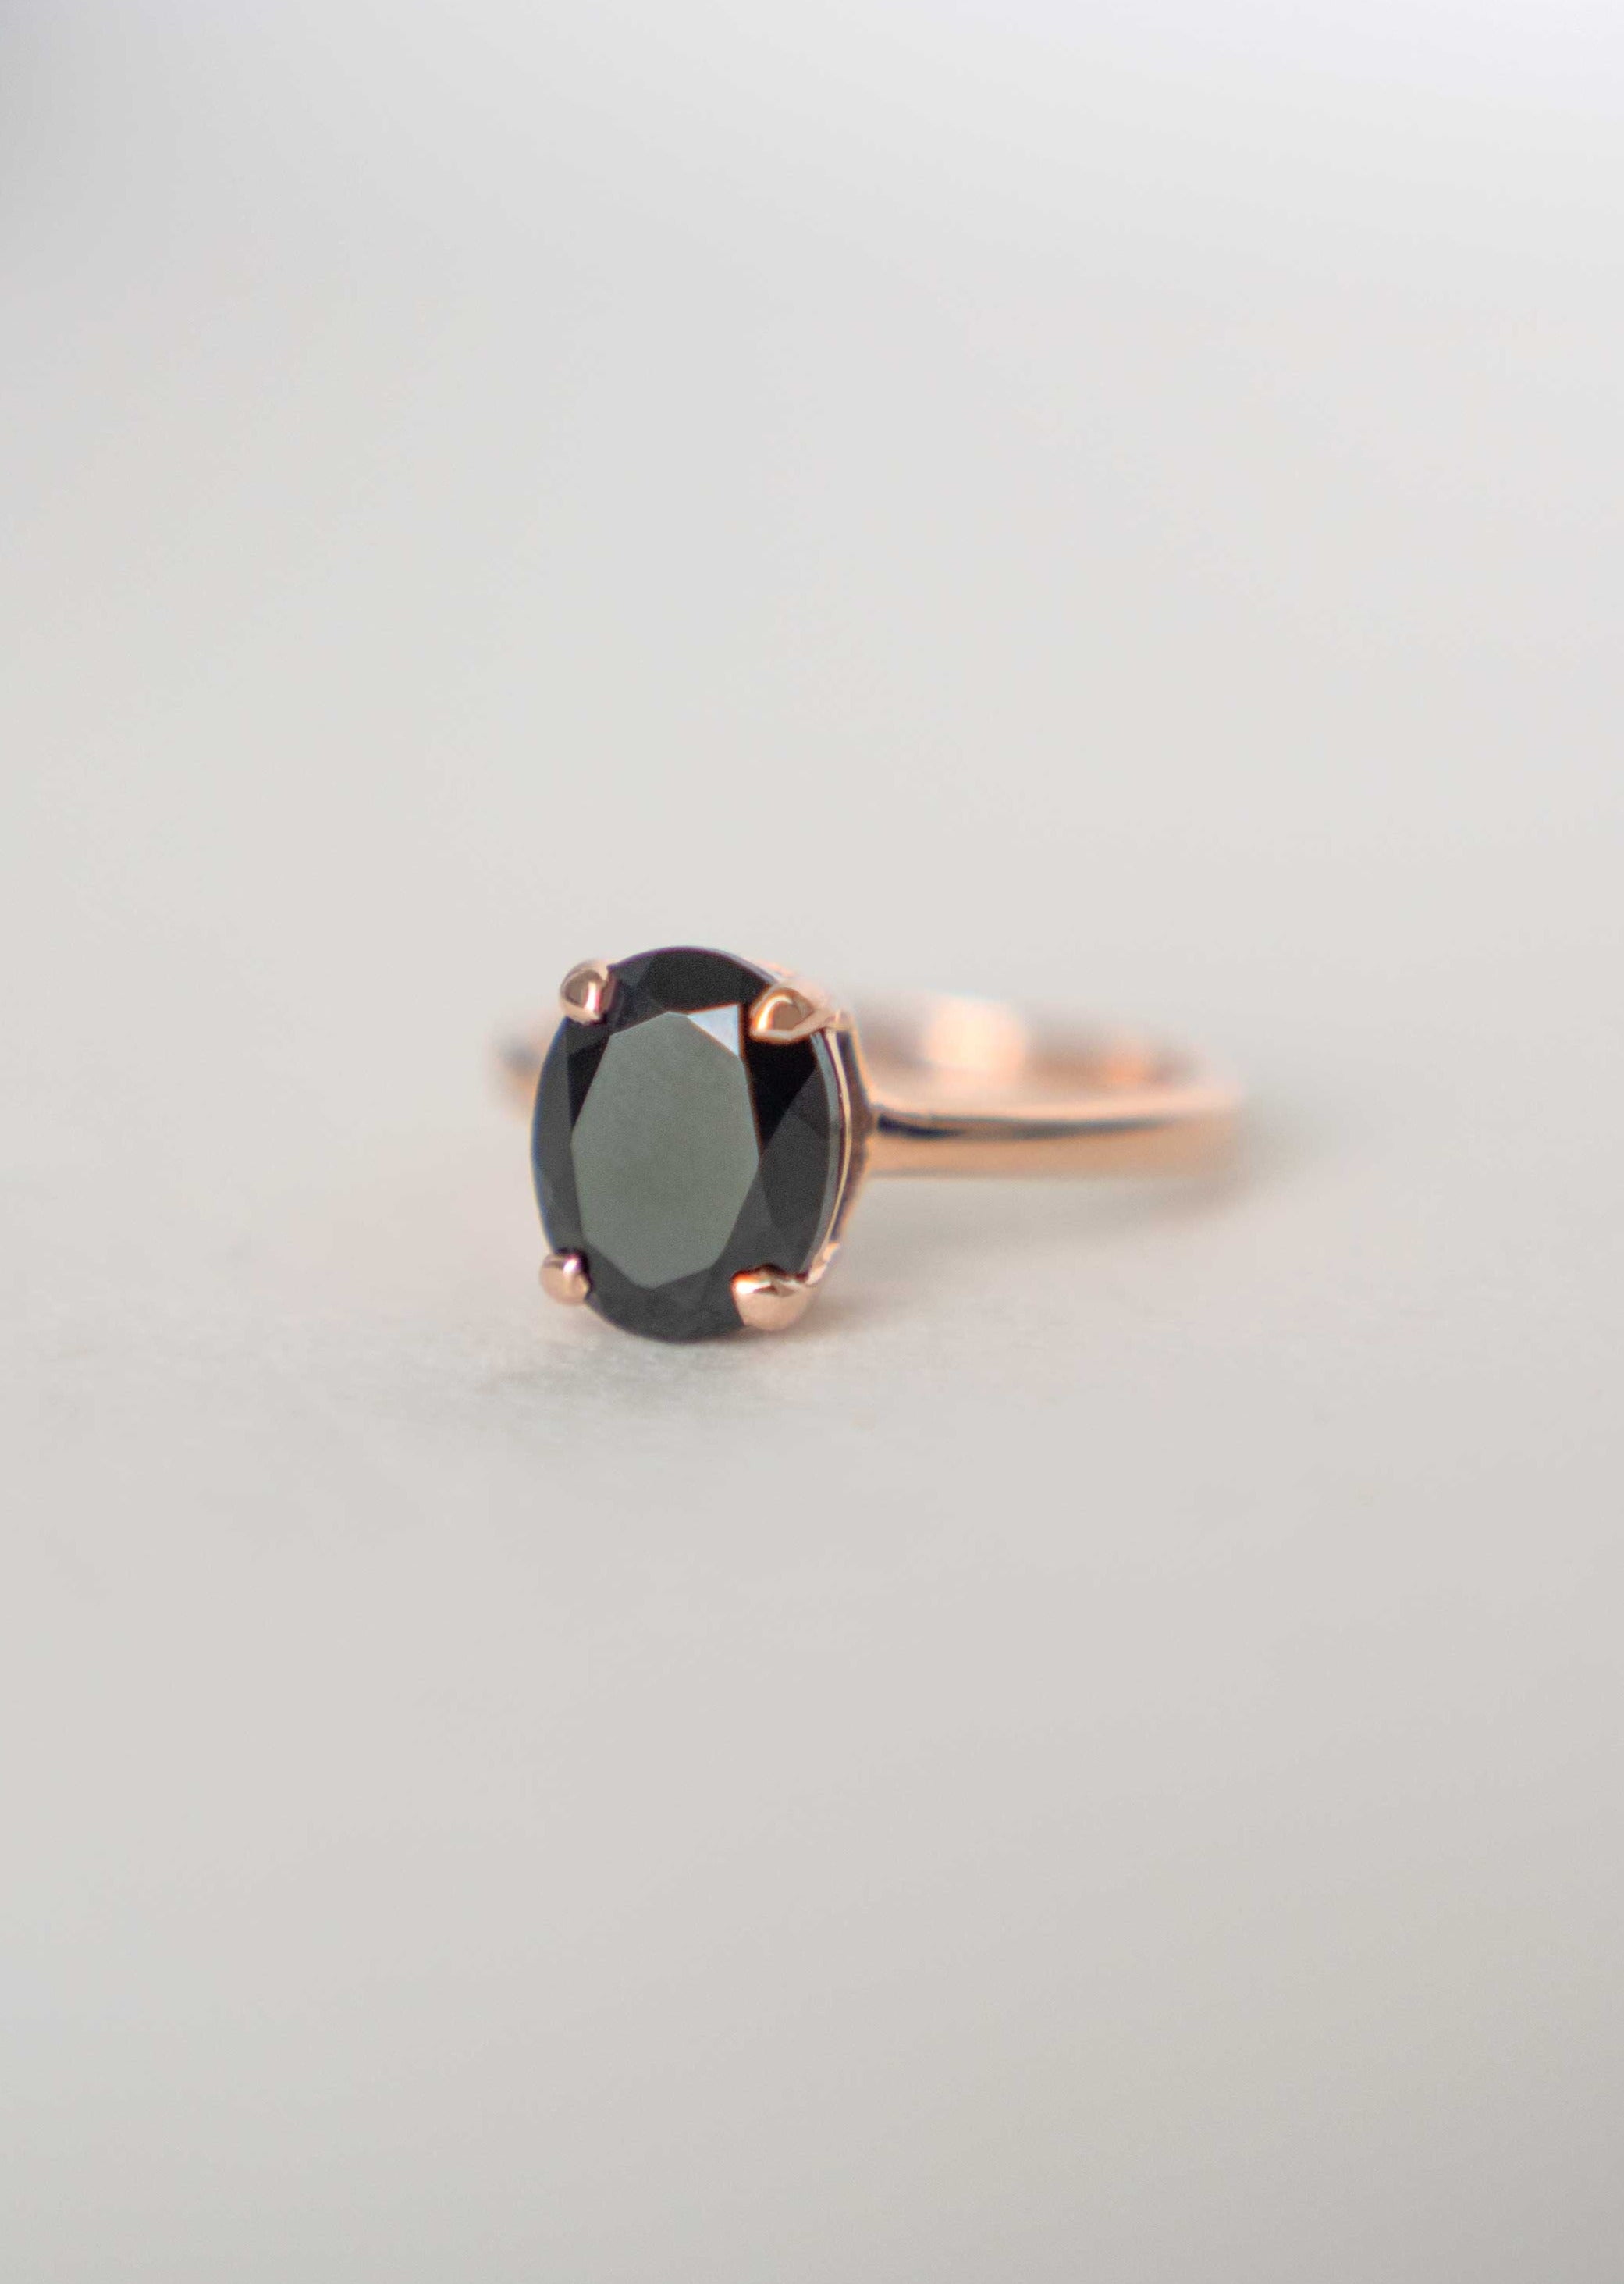 Black Onyx Gemstone Natural Genuine Rose Gold Large Statement Rings gifts for women